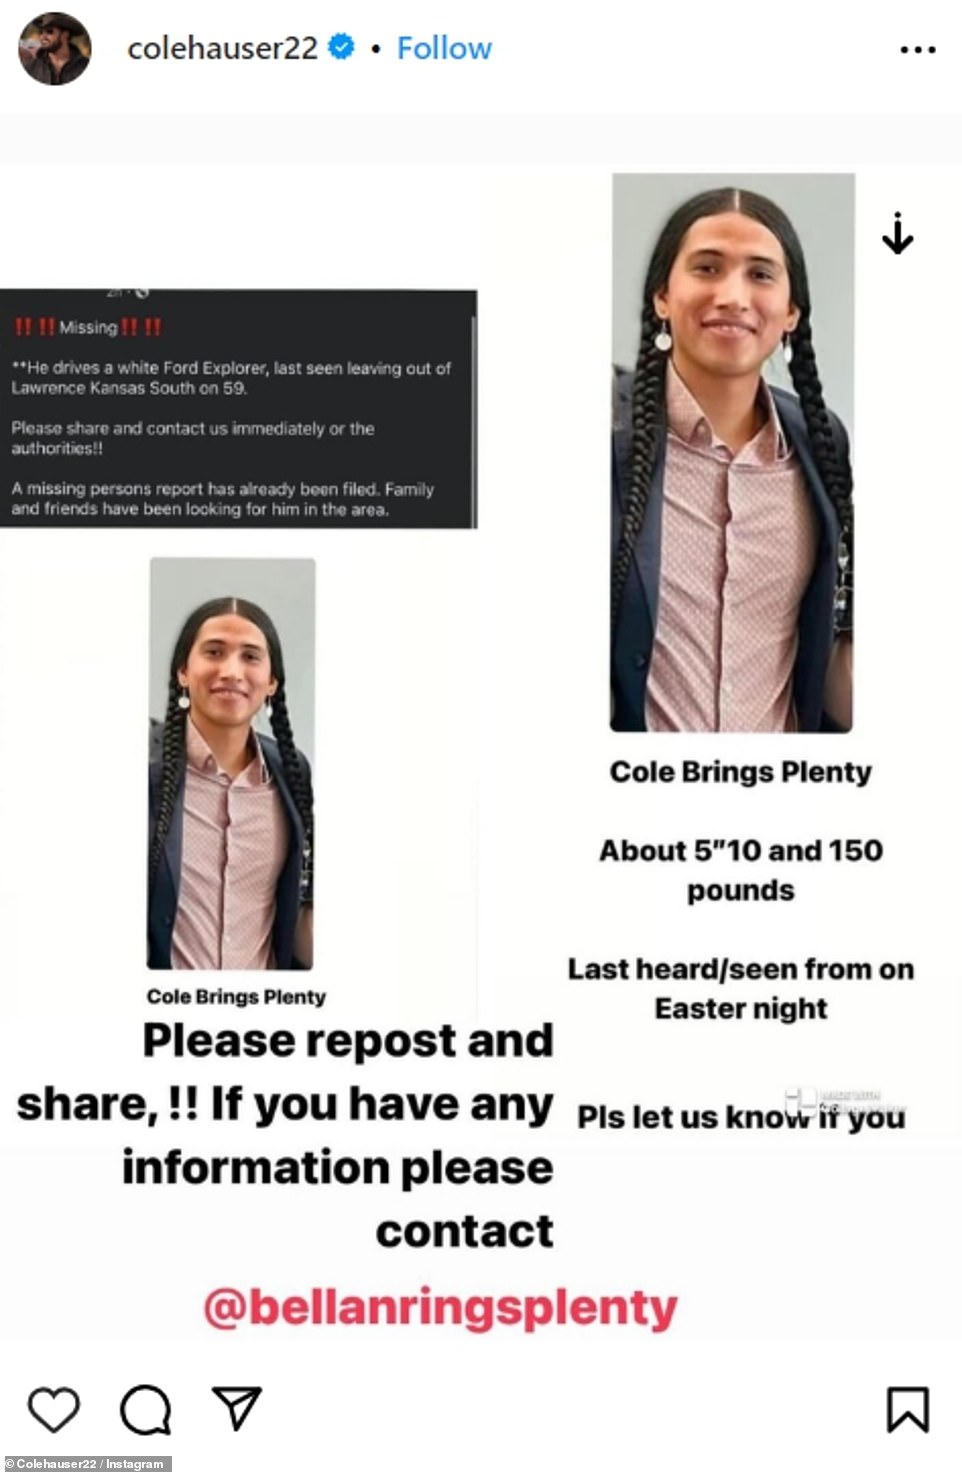 Mo's Yellowstone co-star Cole Hauser, who plays Rip Wheeler on the series, shared a poster on his Instagram, urging his followers to come forward with any information if they had seen Cole since Easter night in Kansas City.